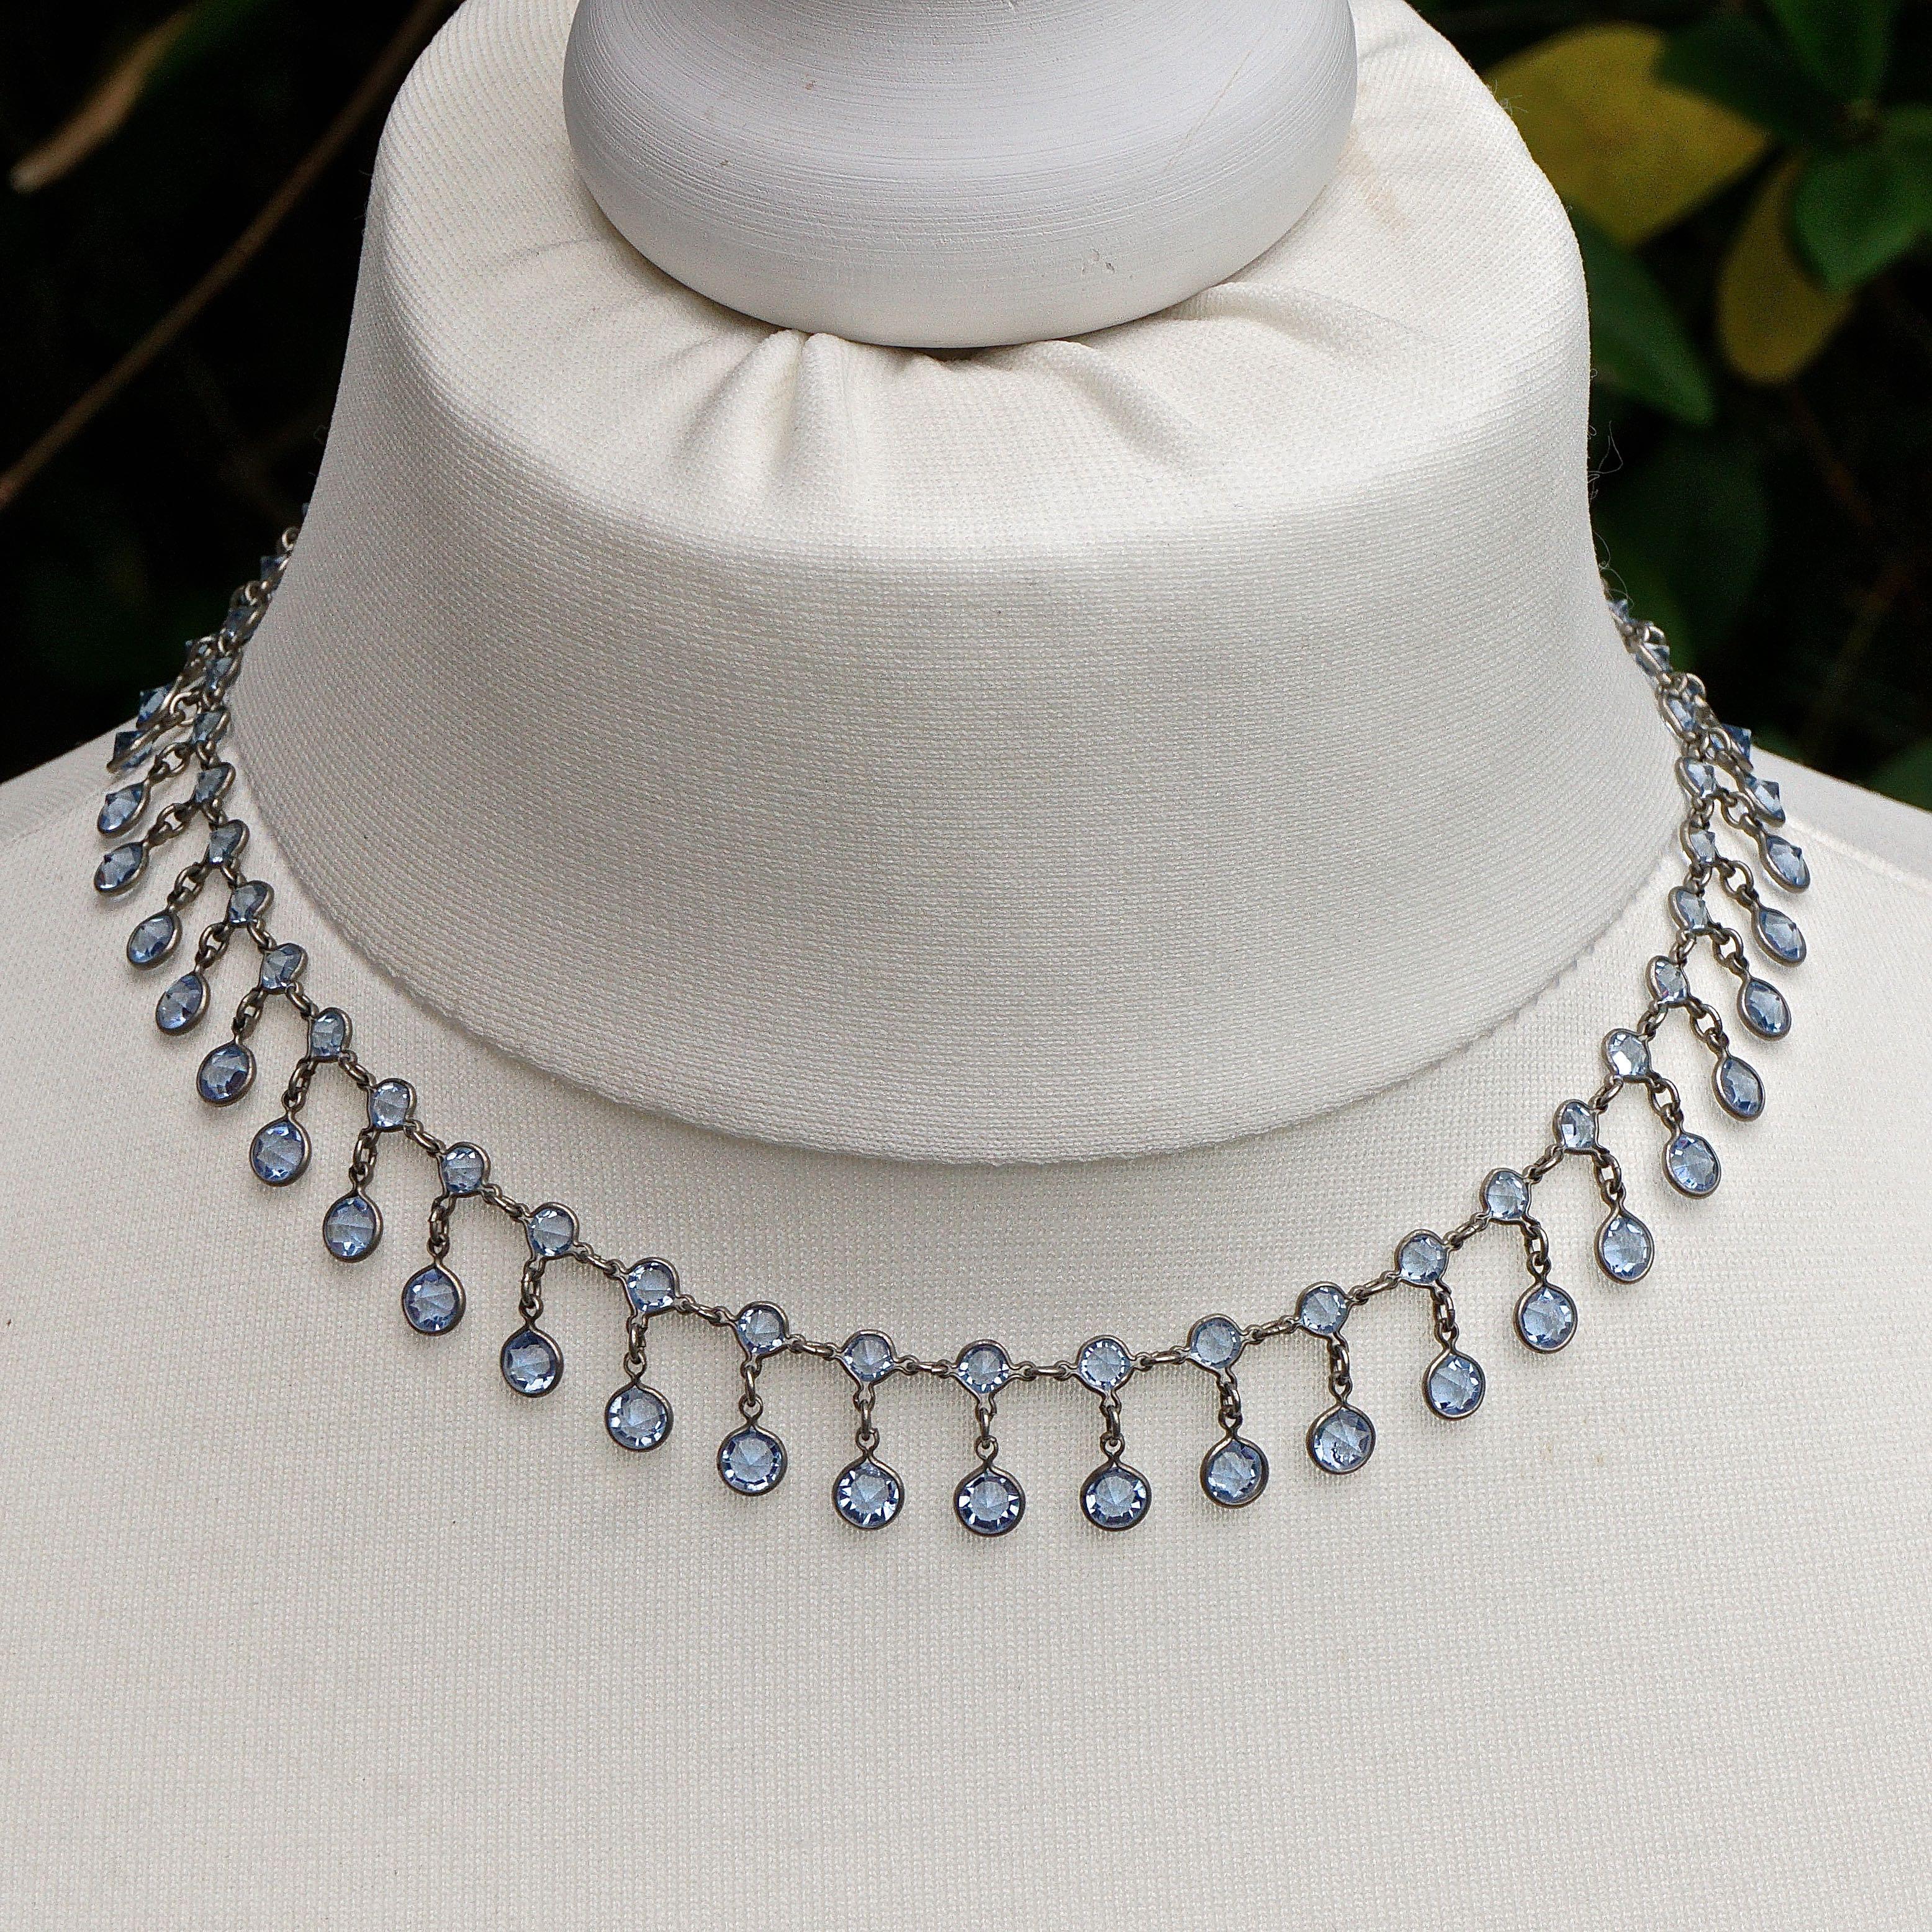 
Beautiful Art Deco Platinon festoon necklace, featuring blue crystal drops. The faceted crystals are raised at the front and pointed at the back, for maximum sparkle. Length 39.5cm / 15.5 inches by width 1.3cm / .5 inch. The necklace is in very